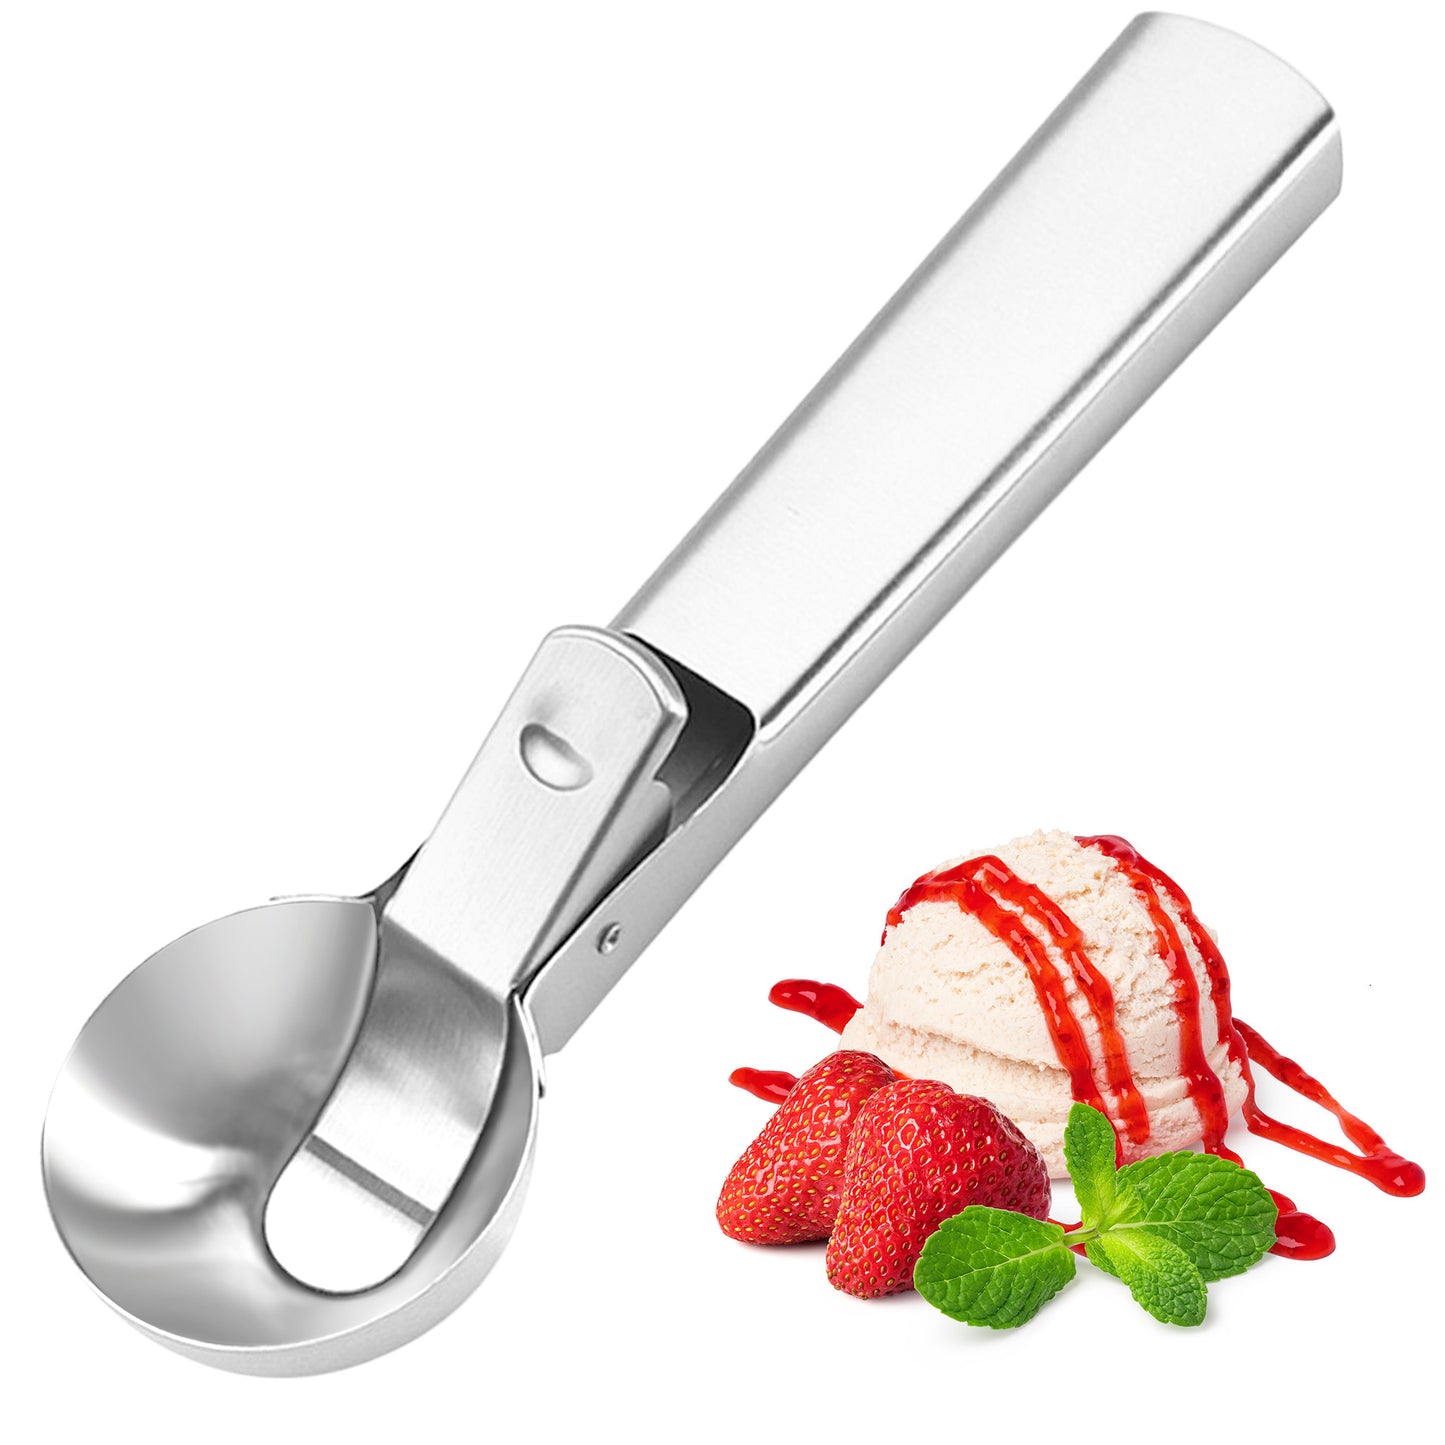 Stainless Steel Ice Cream Scooper, Cookie Dough Scoop with Trigger Spoon, Ice Cream Scoop, Silver